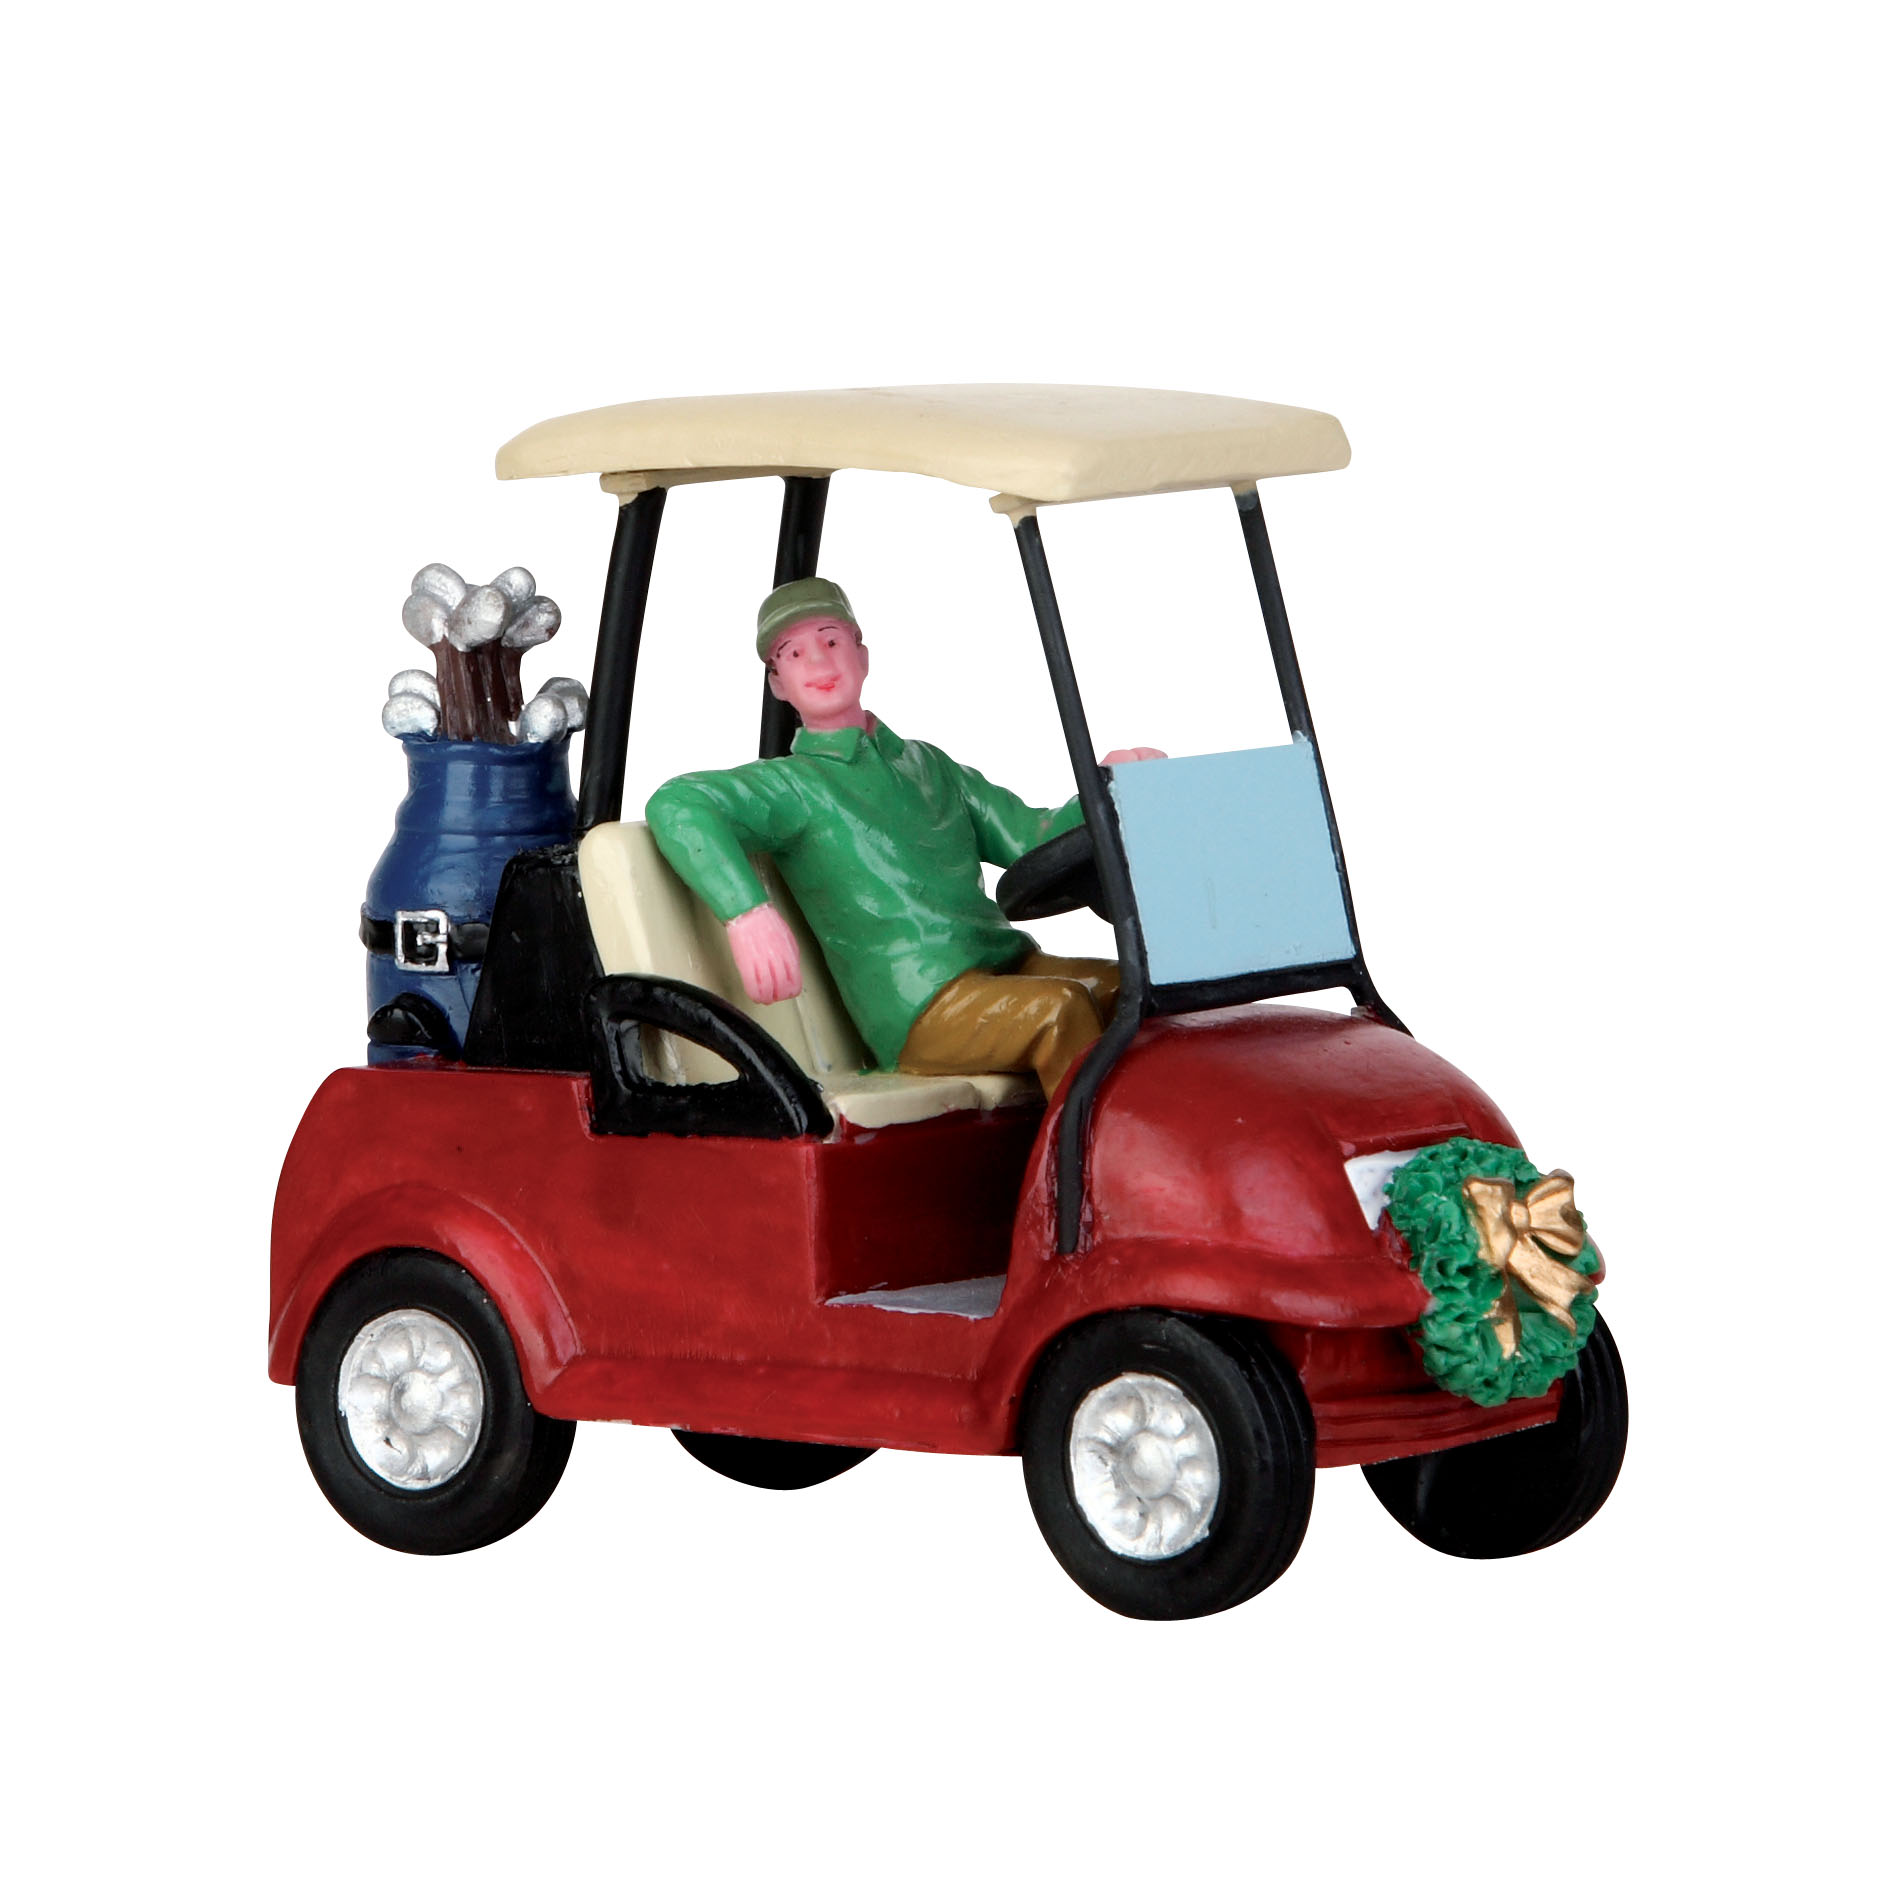 Lemax Village Collection Christmas Village Accessory, Golf Cart